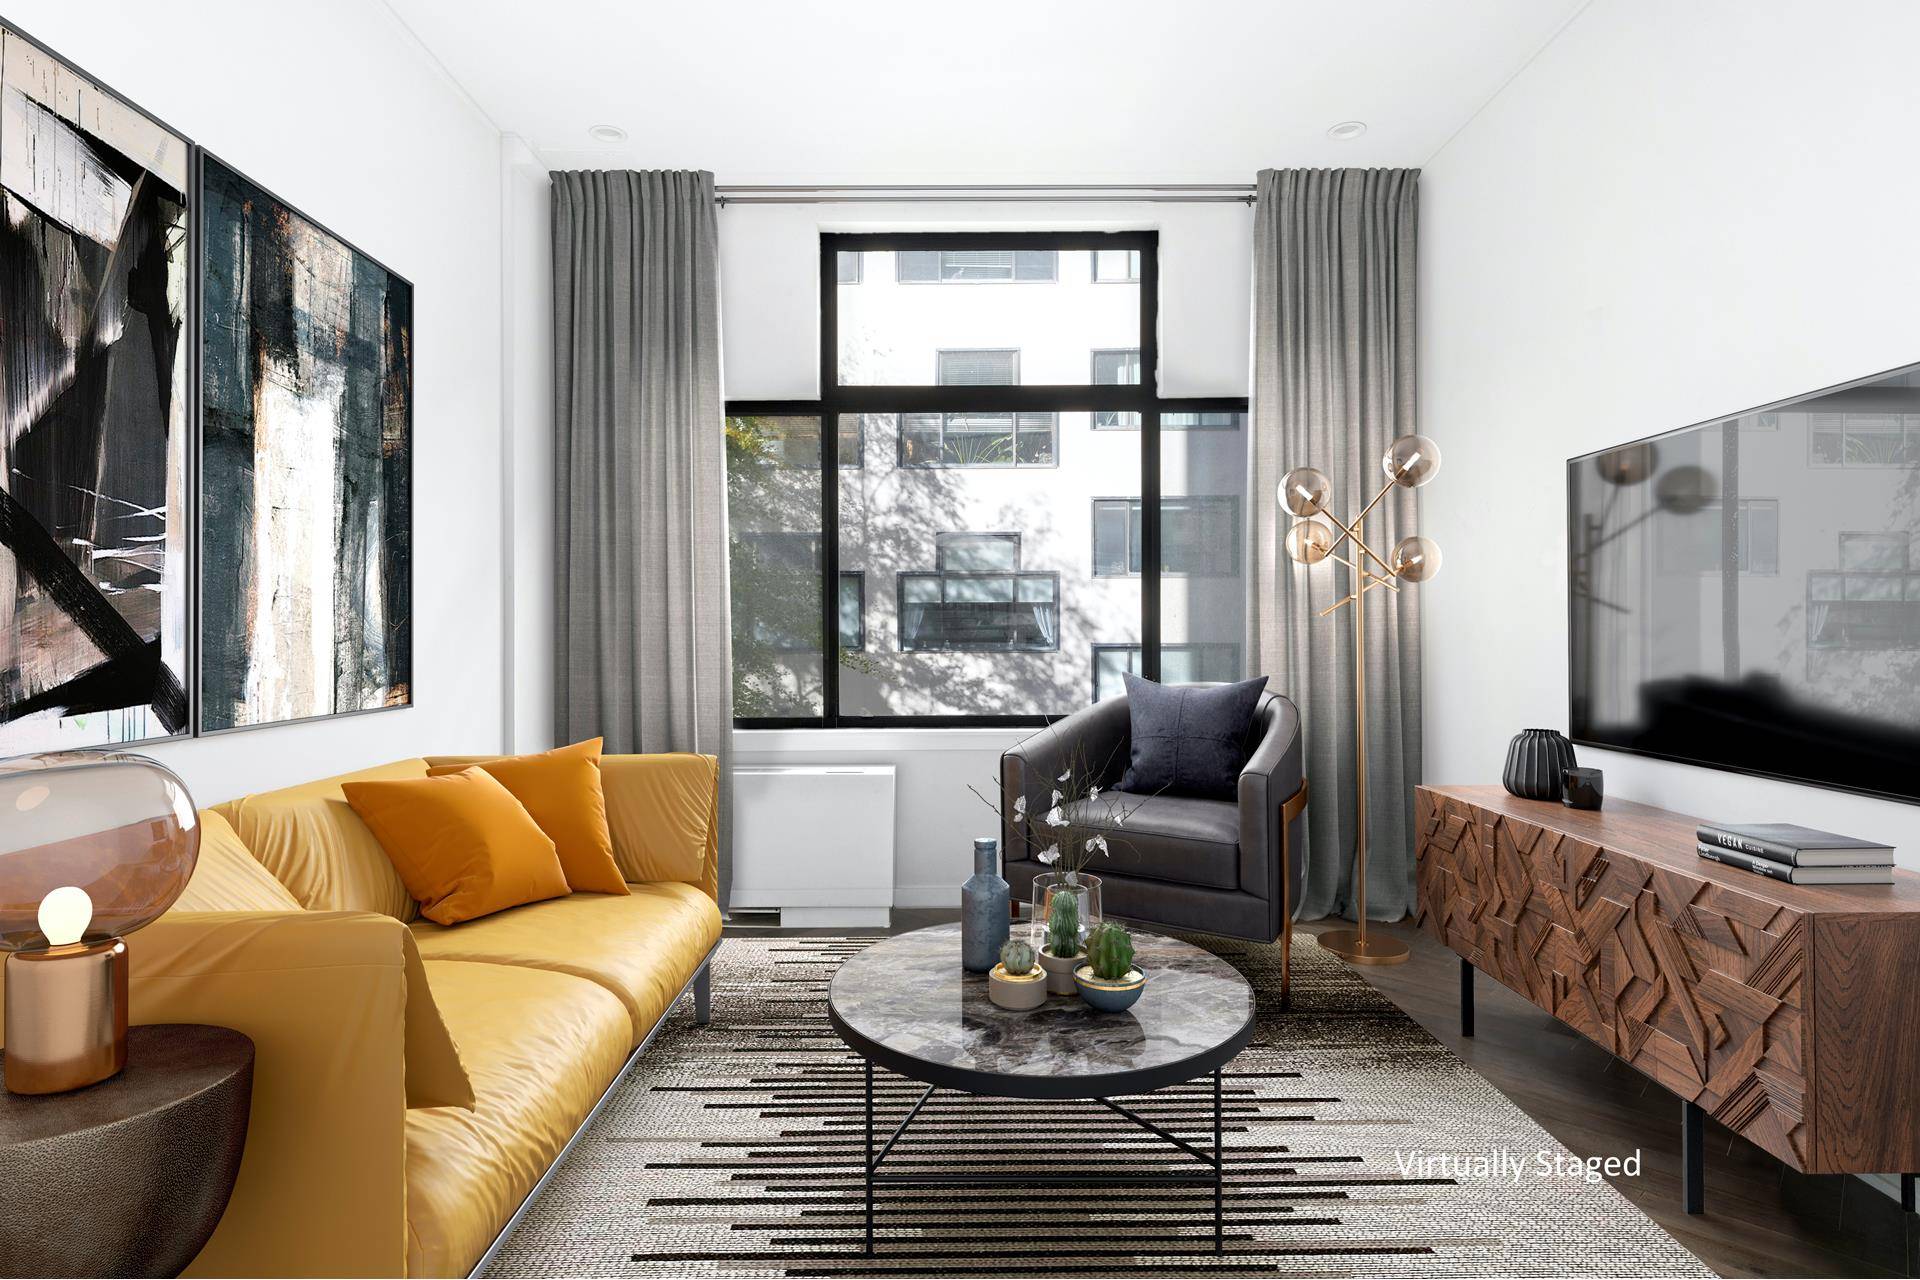 Set at the crossroads of Greenwich Village and SoHo, this stunning oversized one bedroom home has been renovated to perfection.